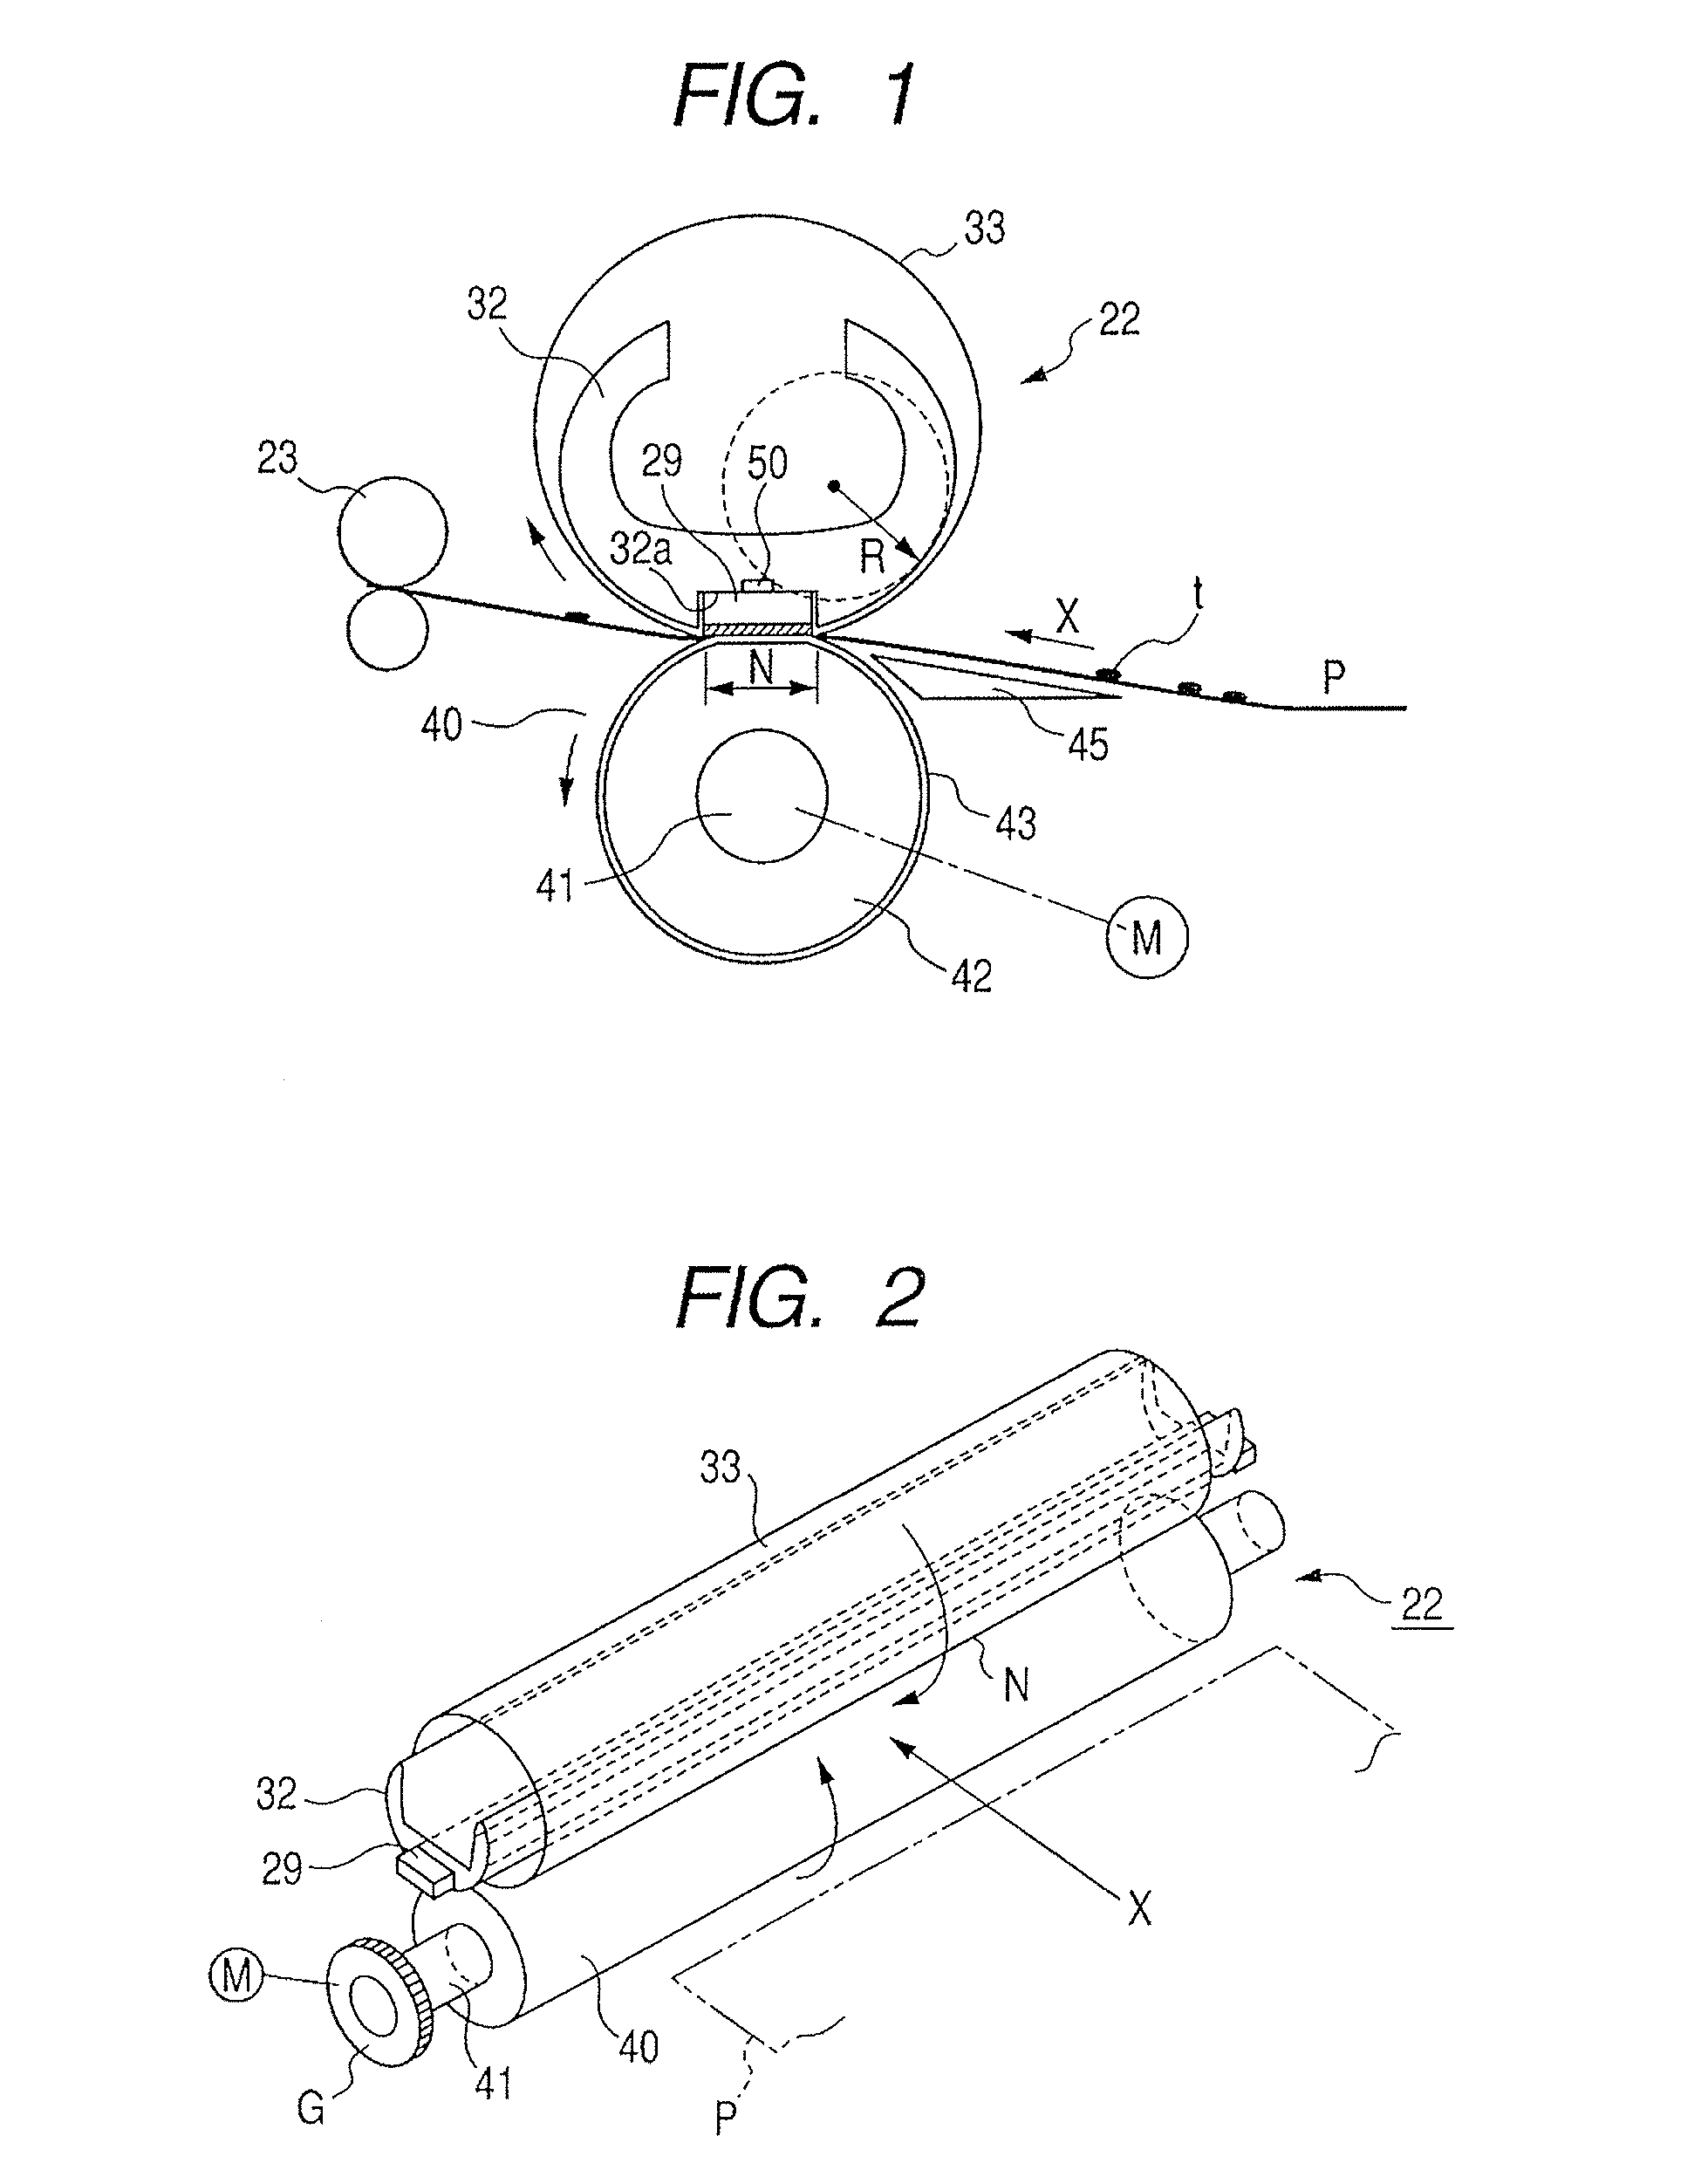 Image heating apparatus and flexible sleeve used for the same